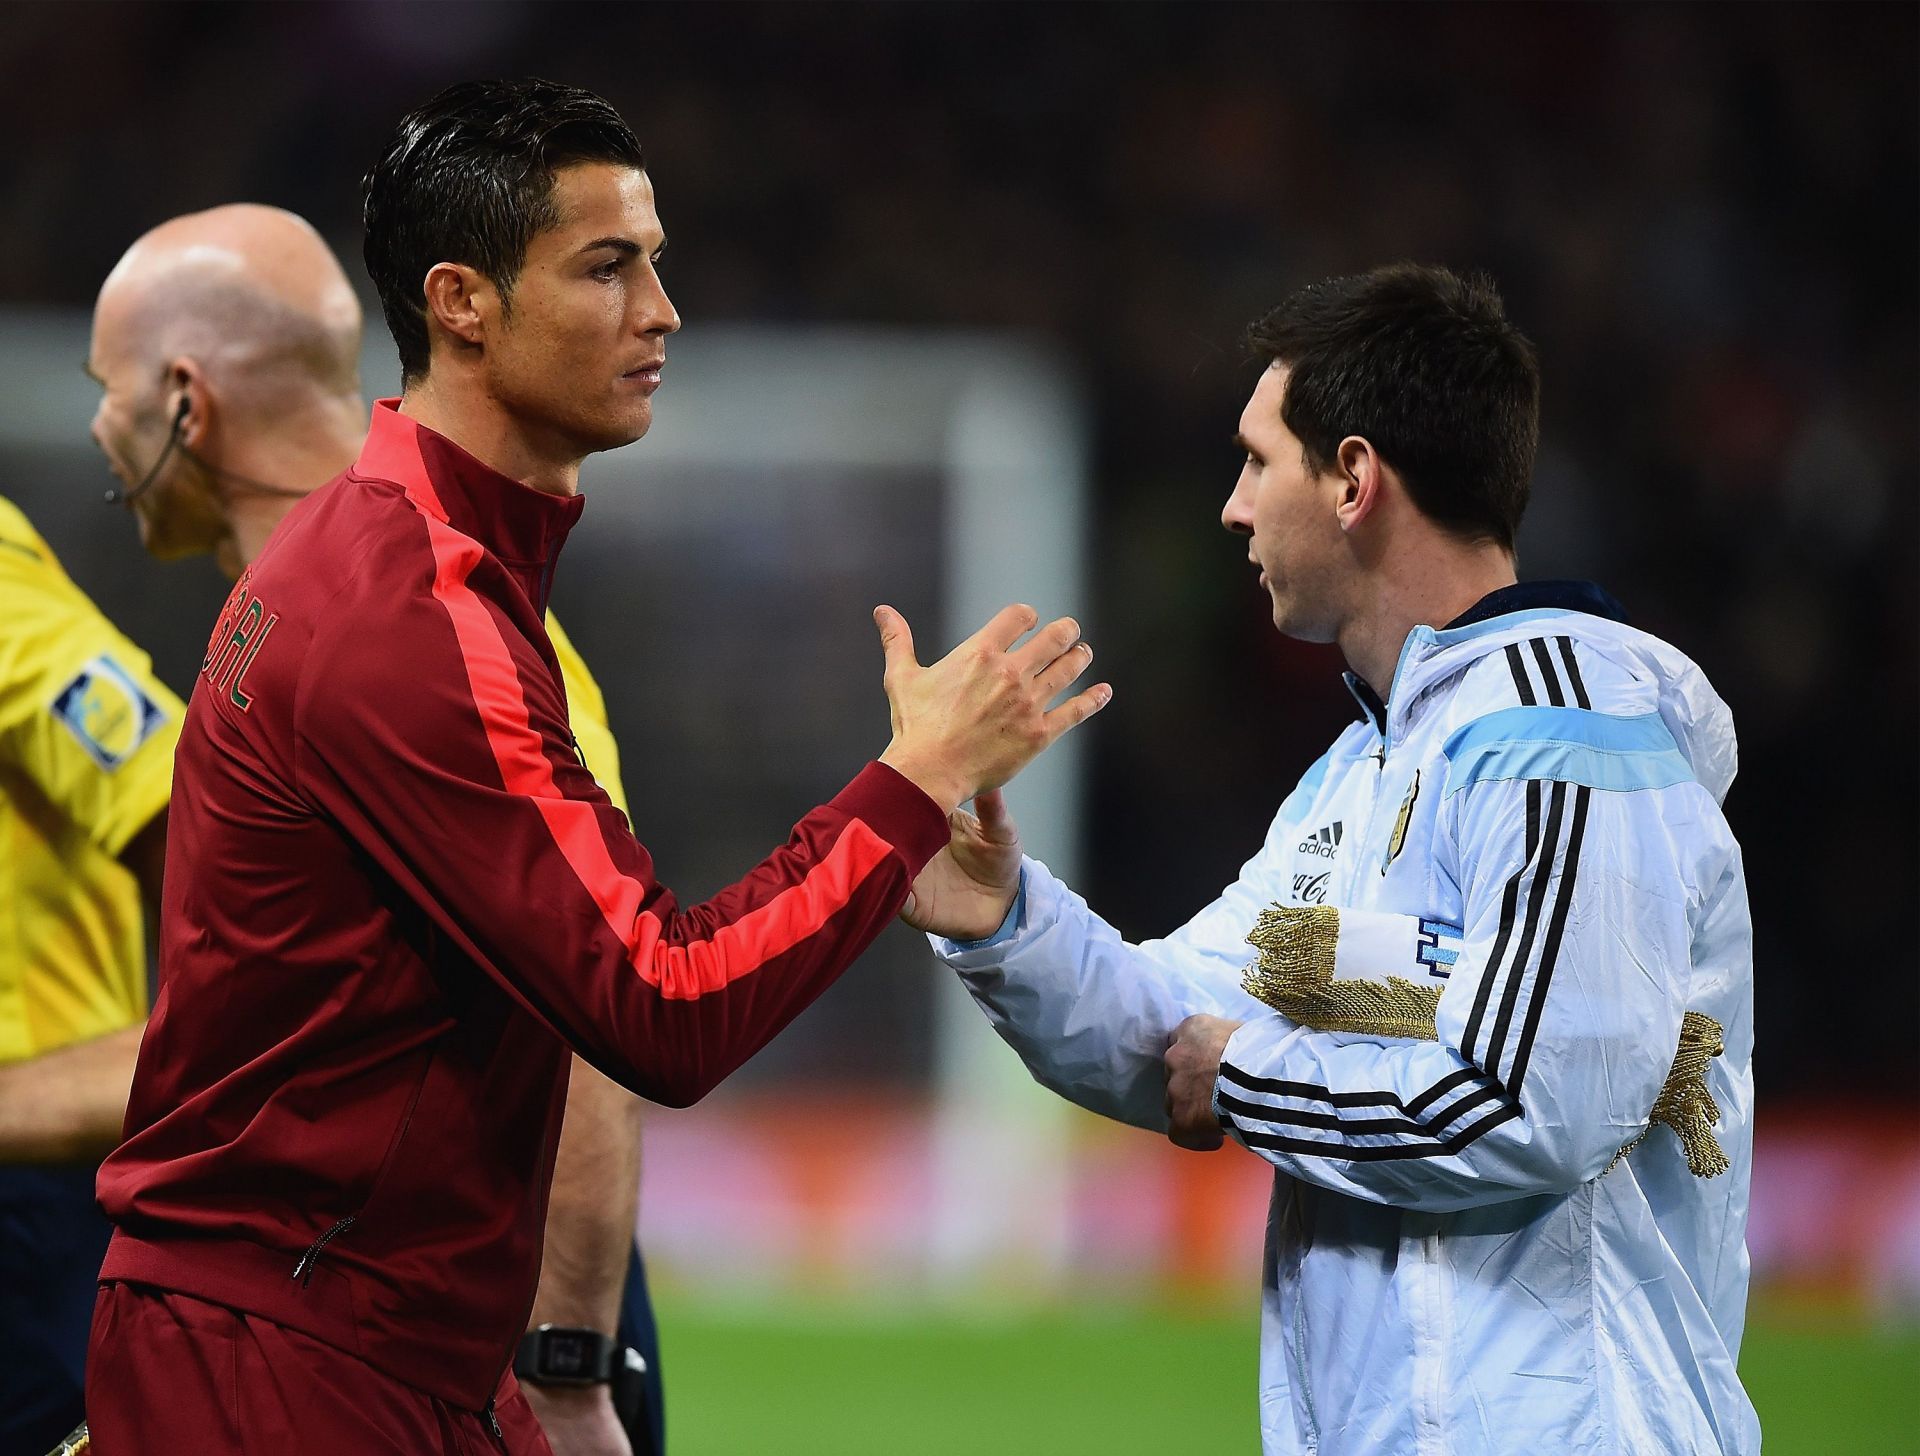 Lionel Messi and Cristiano Ronaldo will be desperate to perform well in the 2022 World Cup